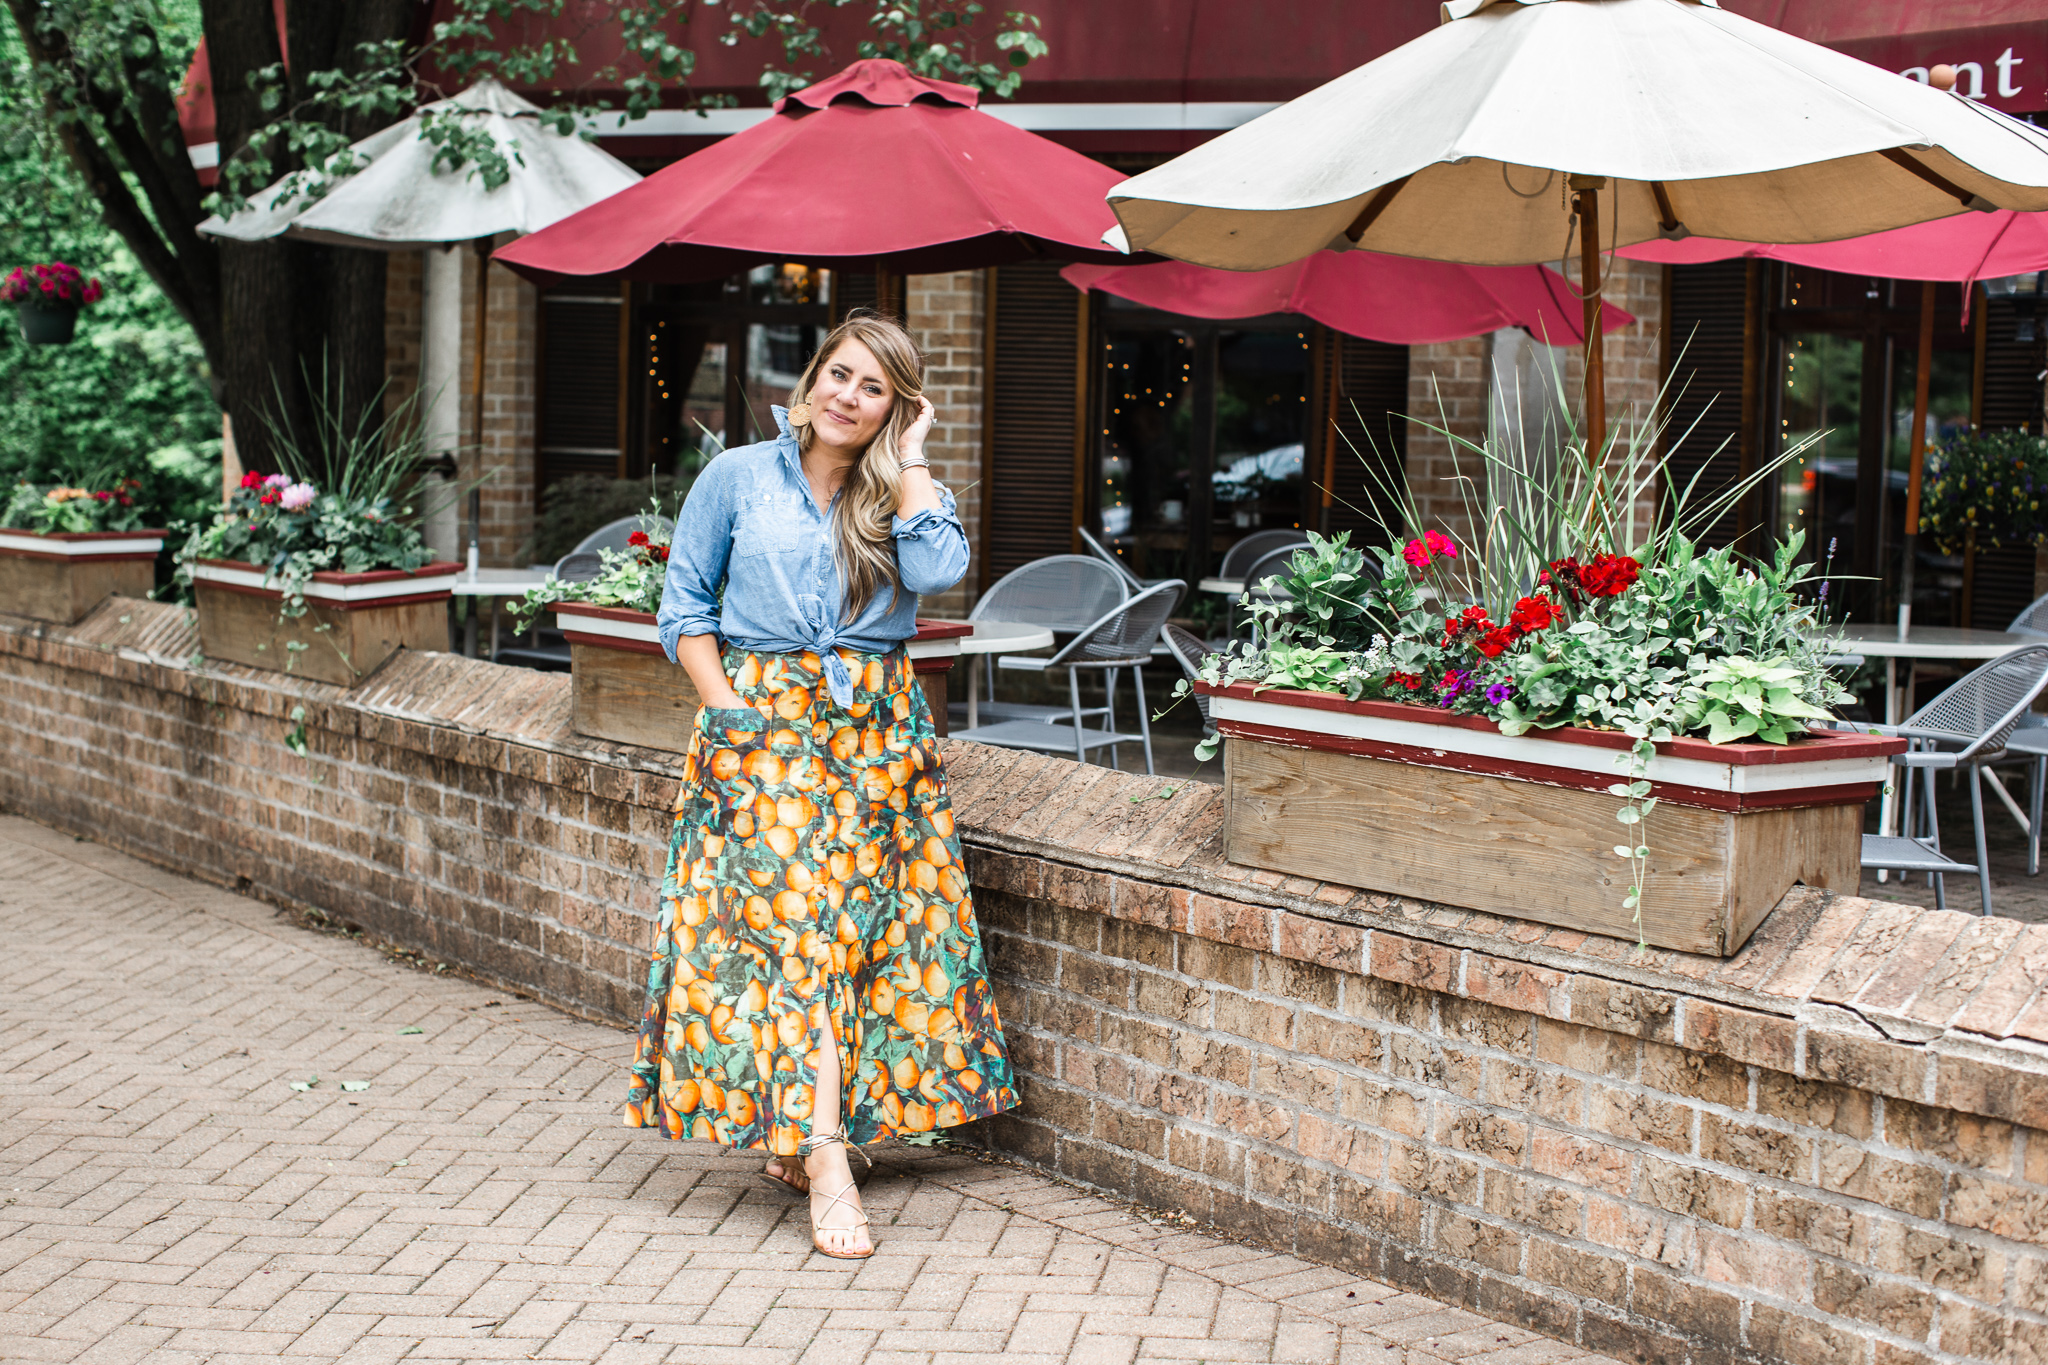 My Favorite Fruit Printed Anthropologie Maxi Skirt by popular North Carolina fashion blog, Coffee Beans and Bobby Pins: image of a woman standing outside of a restaurant and wearing a Anthropologie Summer Orchard Skirt, J. Crew Everyday chambray shirt, Madewell Coin Necklace Set, and DREAM PAIRS Women's Sammy Gladiator Lace up Flat Sandals.  